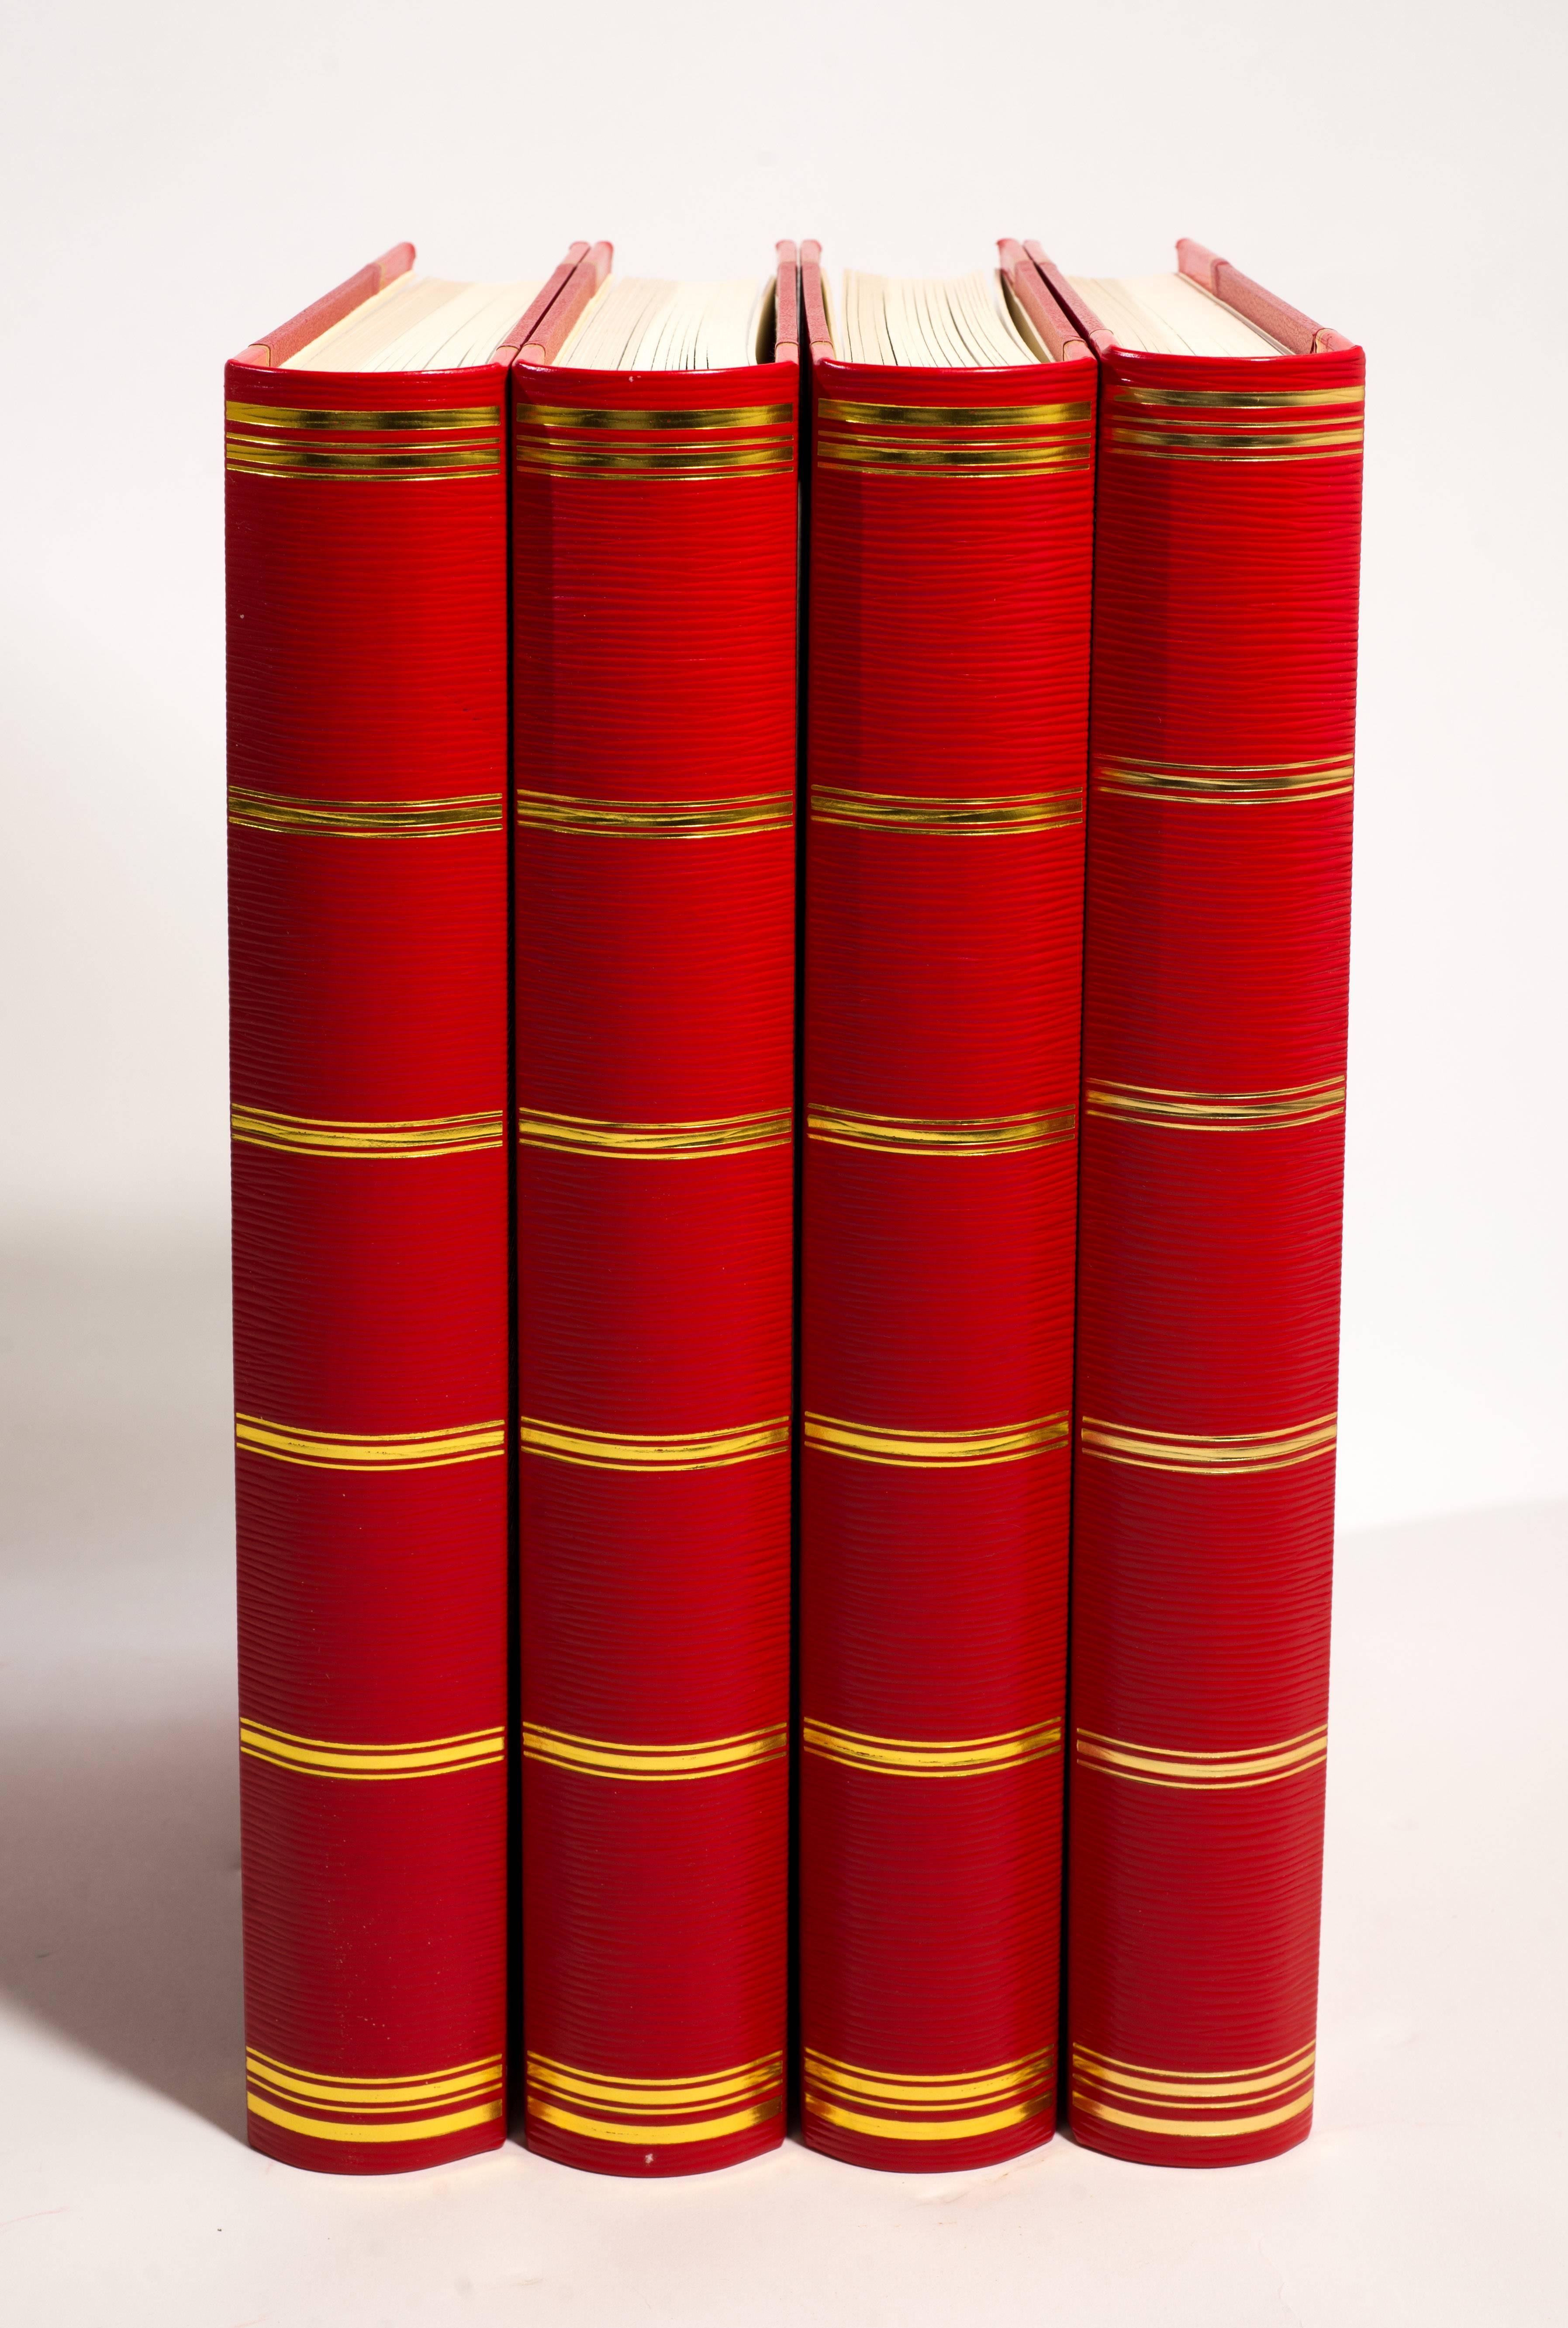 Smythson of Bond Street London mint unused four full scarlet leather bound large photograph albums in original Smythson boxes ordered in 1999. This horizontal full leather covered size is no longer available. These magnificent albums have never been